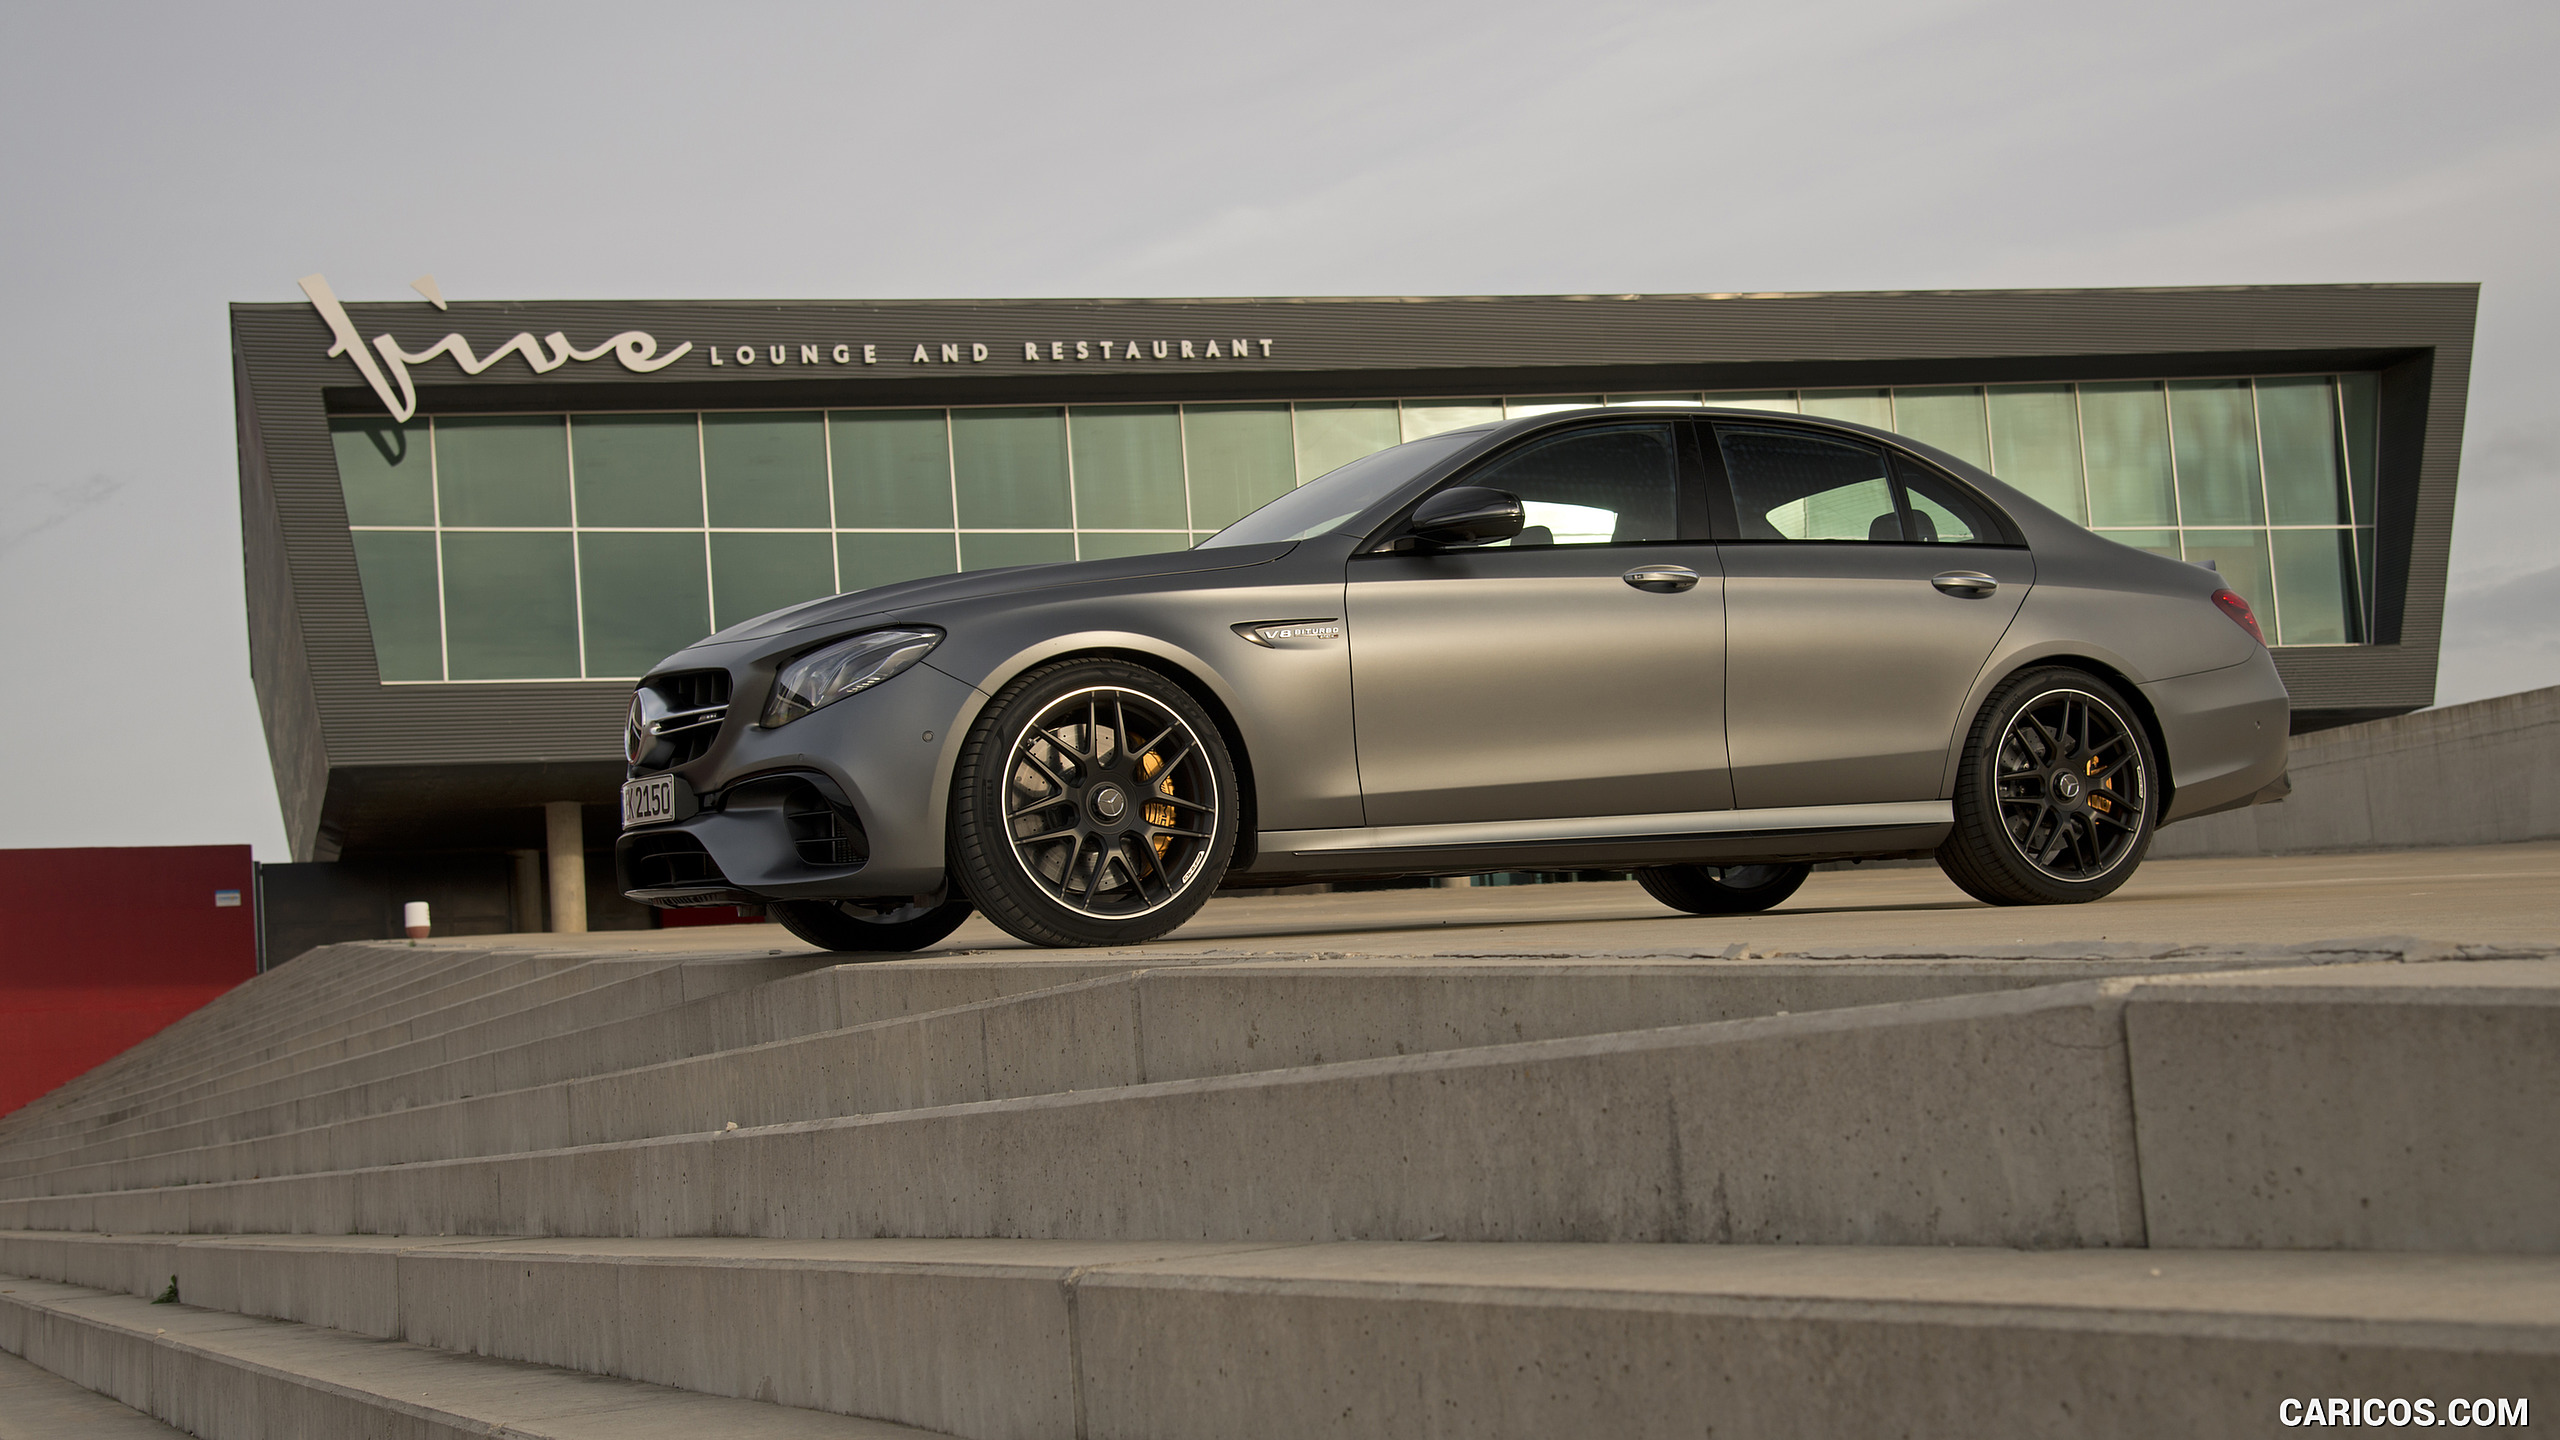 2018 Mercedes-AMG E63 S 4MATIC+ - Side, #307 of 323